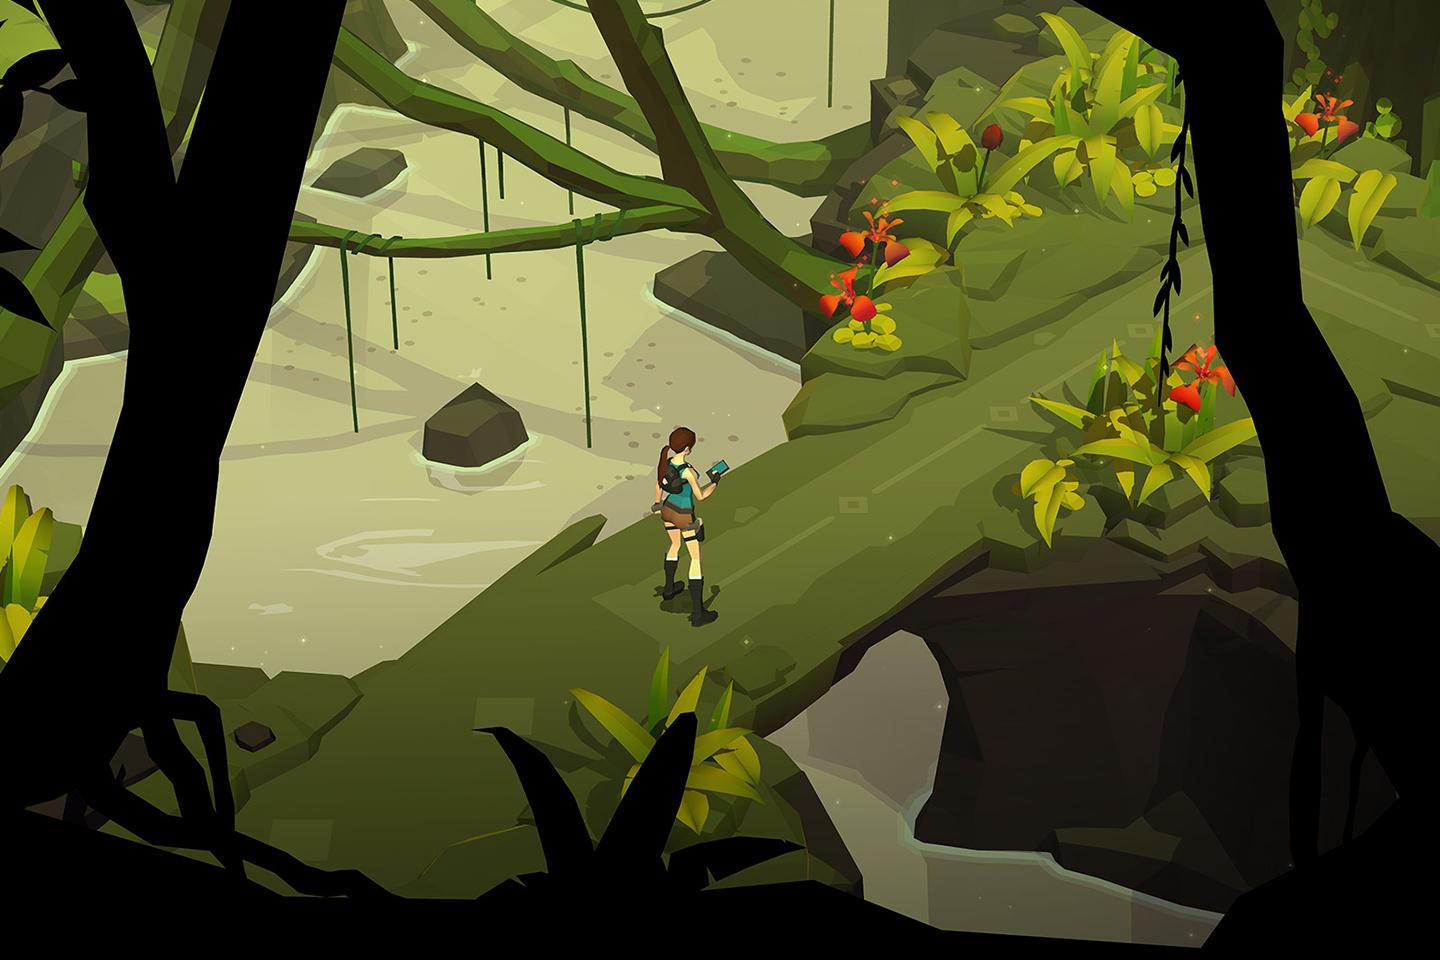 An in-game image of a character exploring a lush, green jungle environment, partially obscured by the silhouettes of foreground foliage.